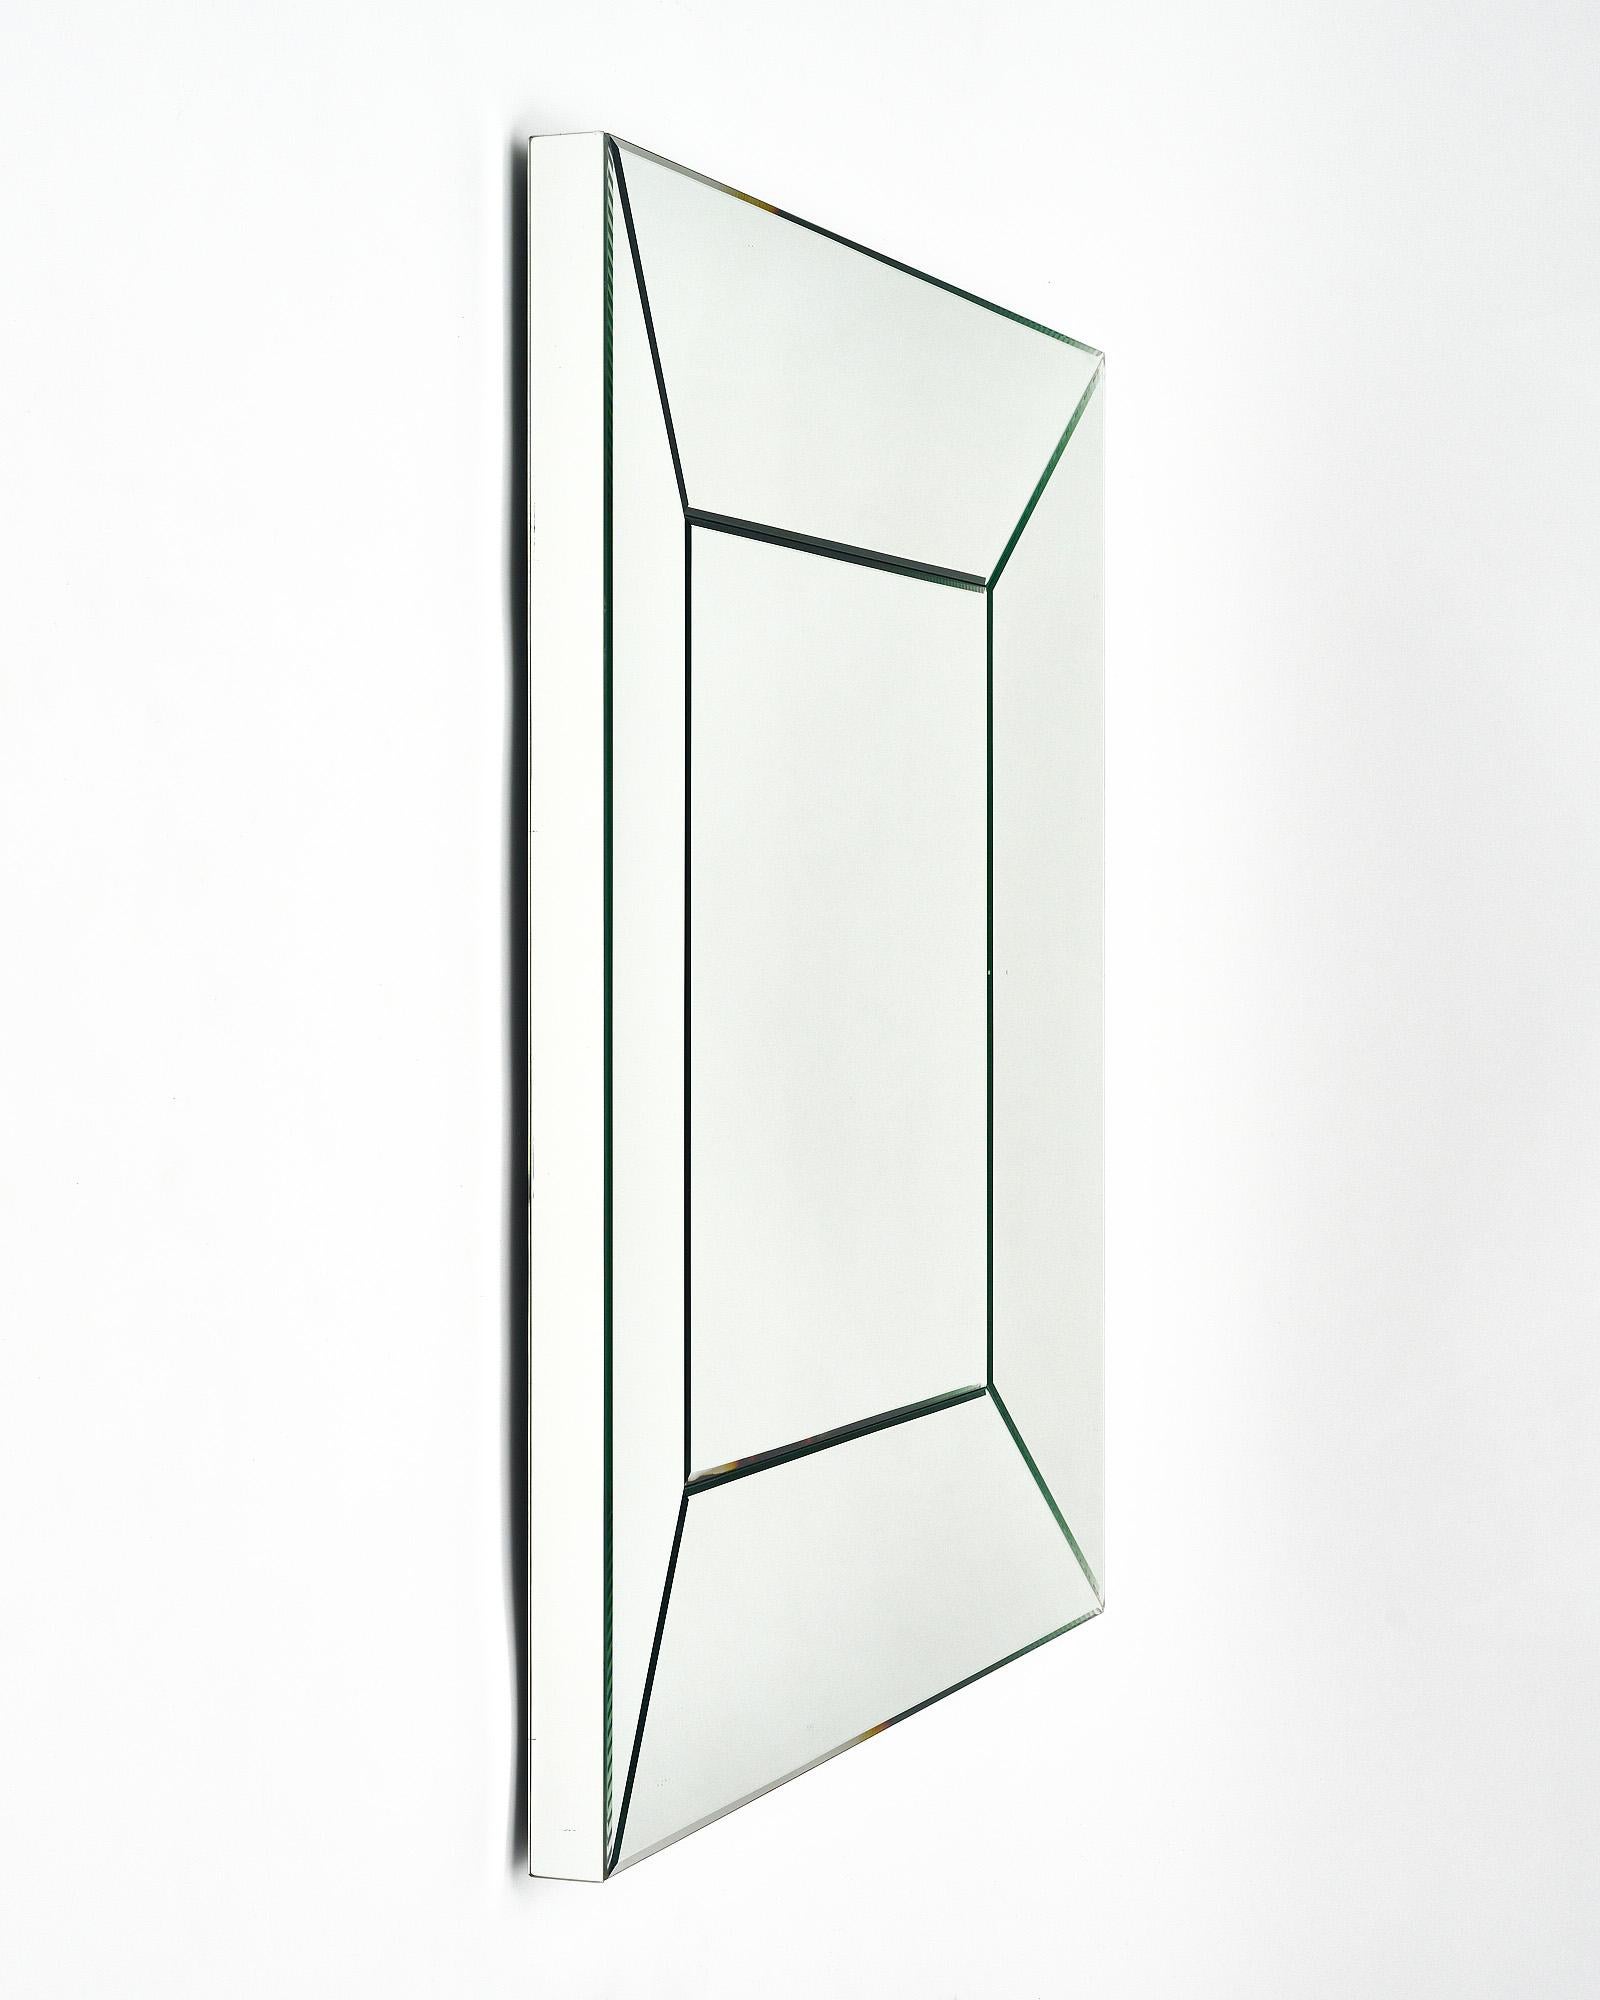 Late 20th Century French Modernist Period Mirror For Sale